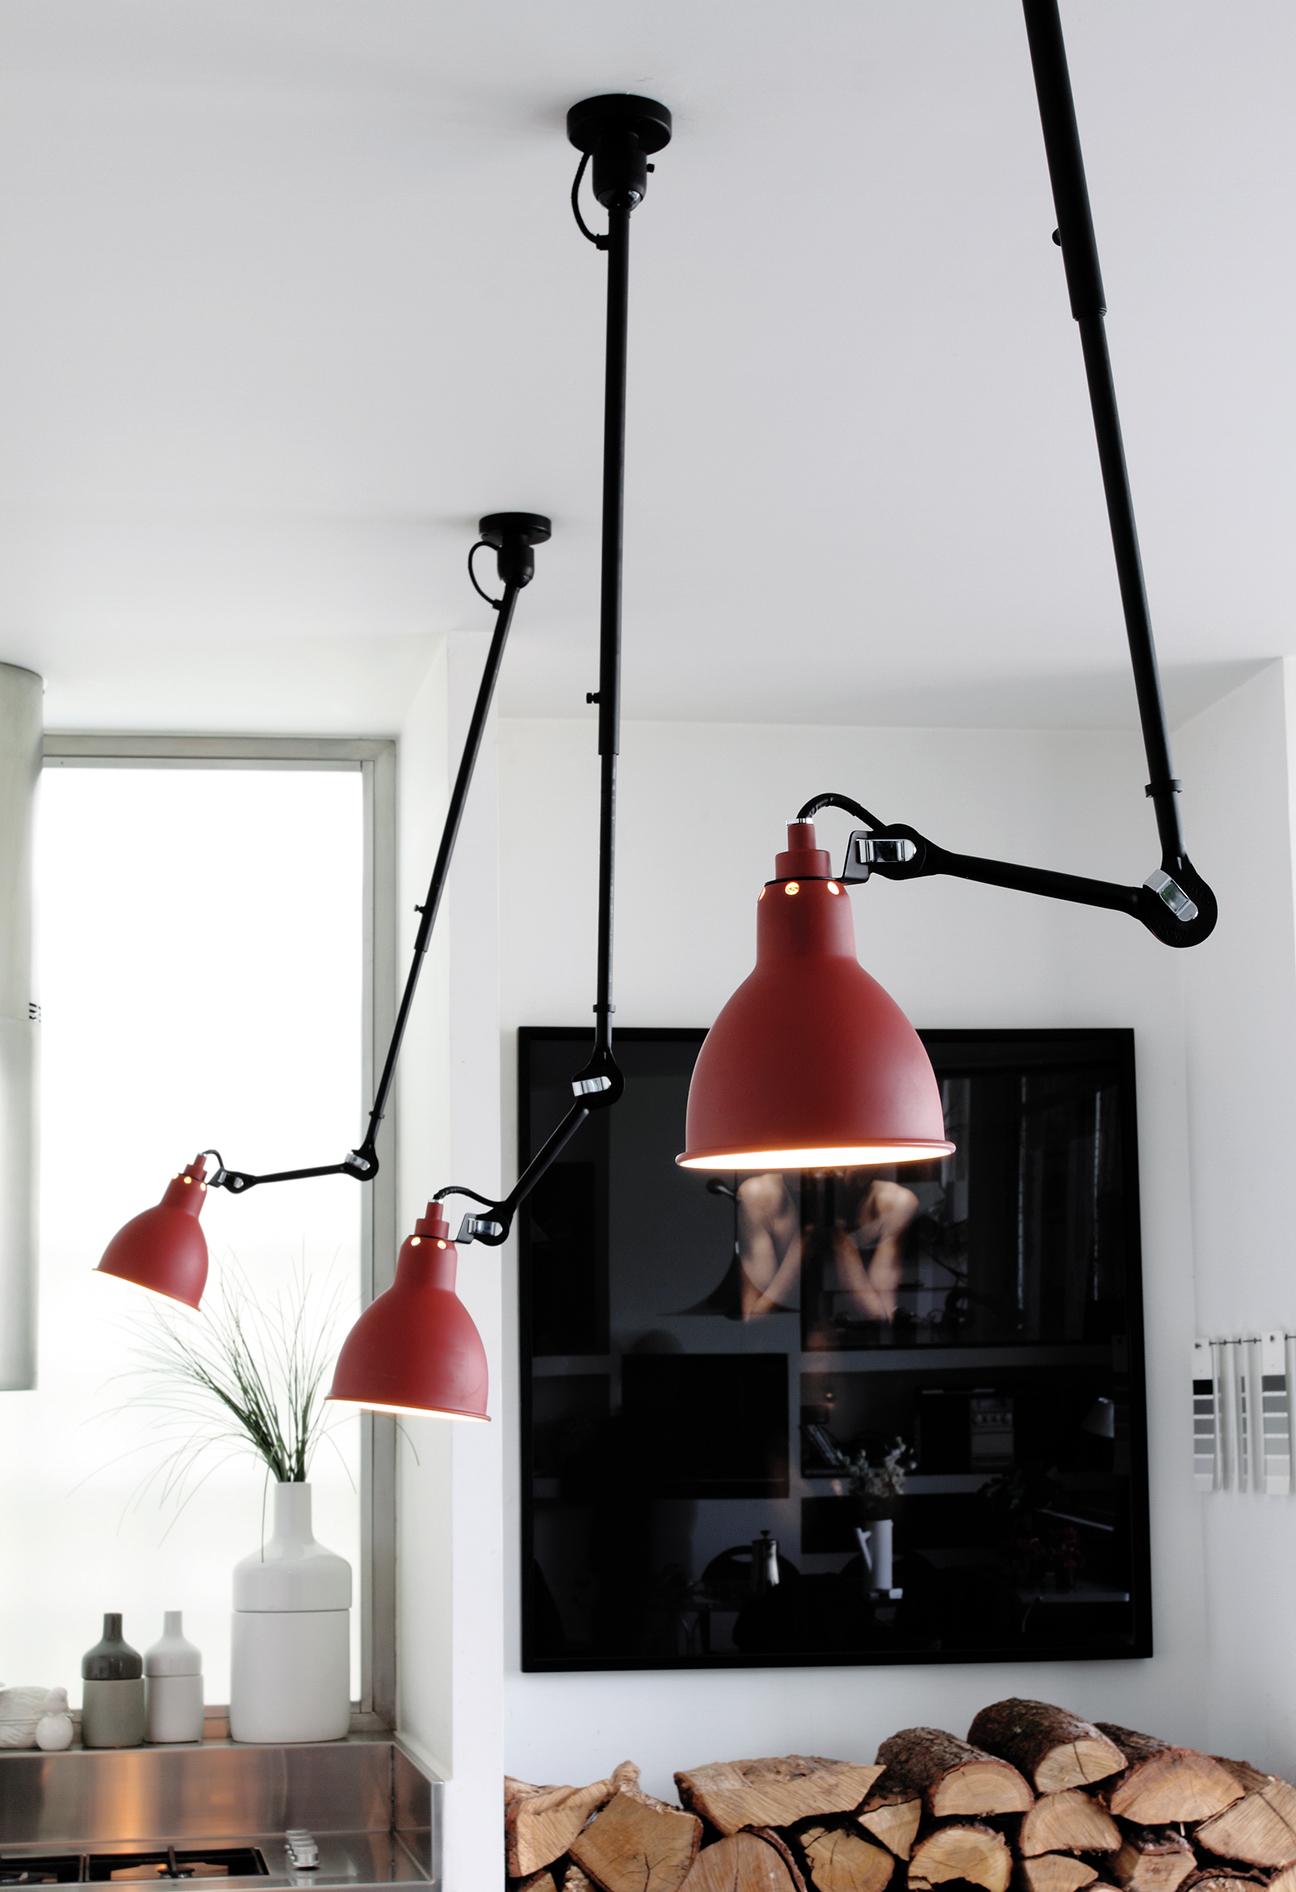 Red lampe Gras N° 302 ceiling lamp by Bernard-Albin Gras
Dimensions: D 14 x W 14 x H 92 cm
Materials: Steel
Also available: Different colors and other shade available,

All our lamps can be wired according to each country. If sold to the USA it